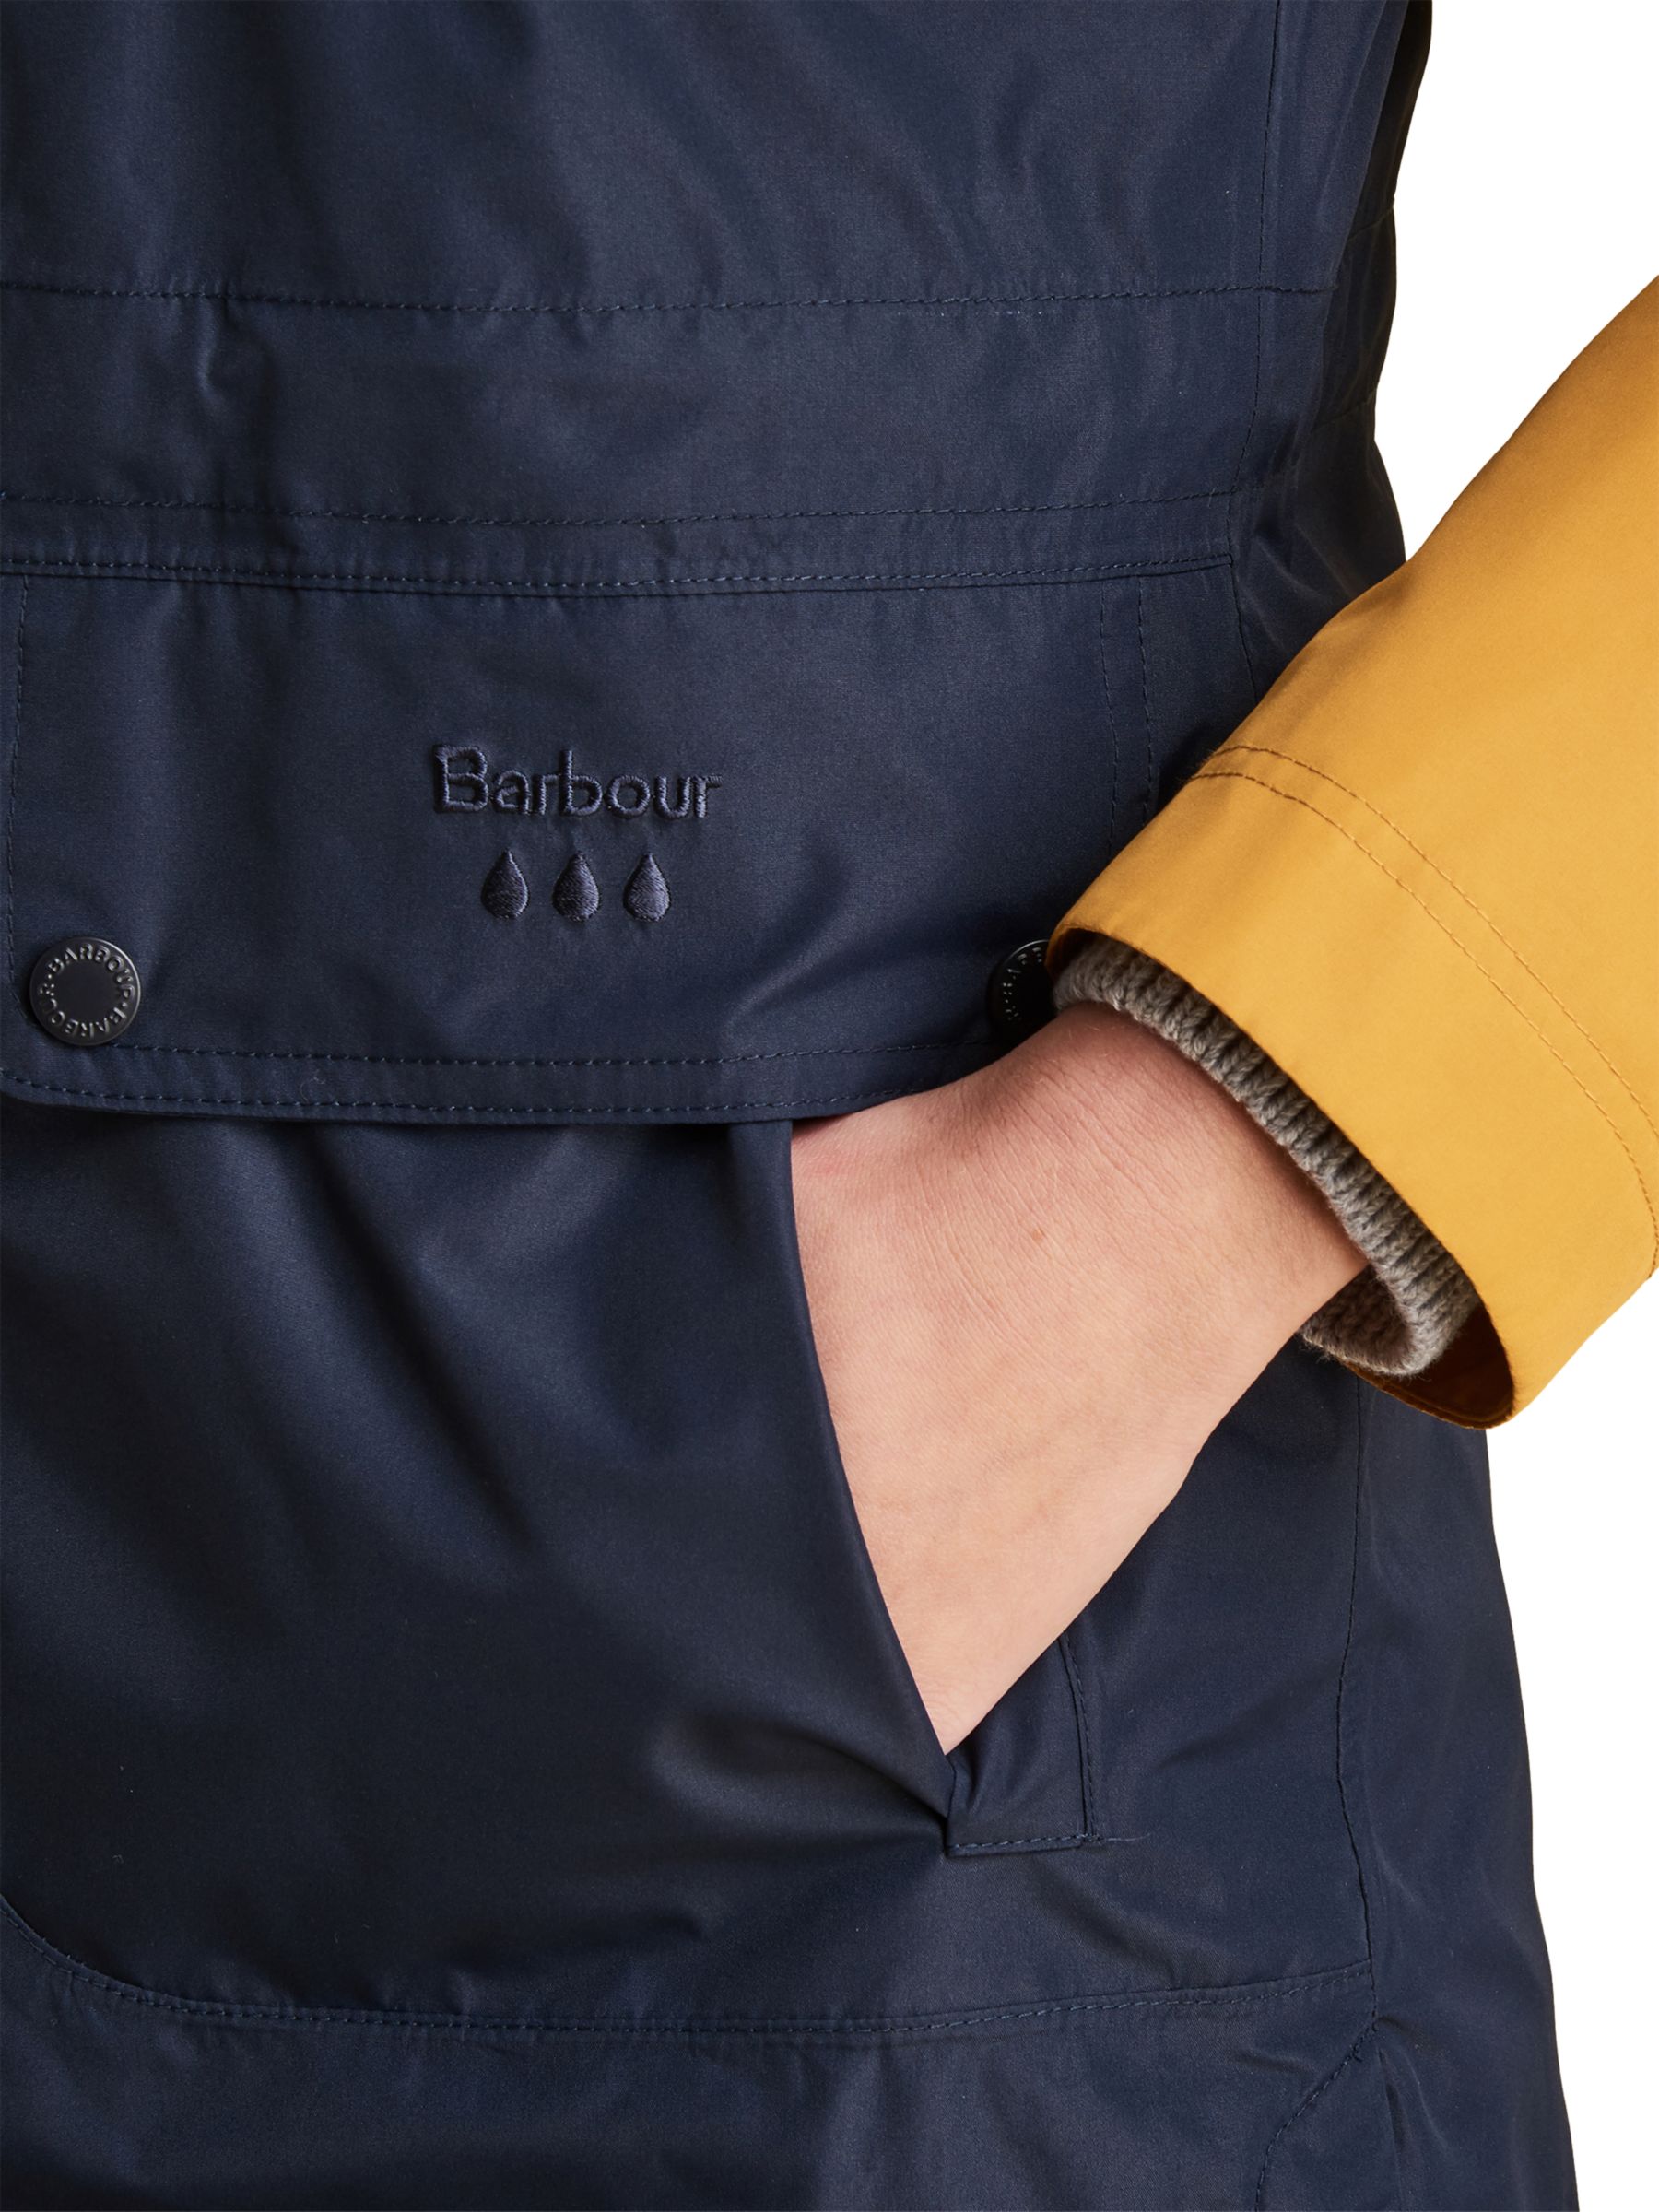 barbour altair jacket yellow